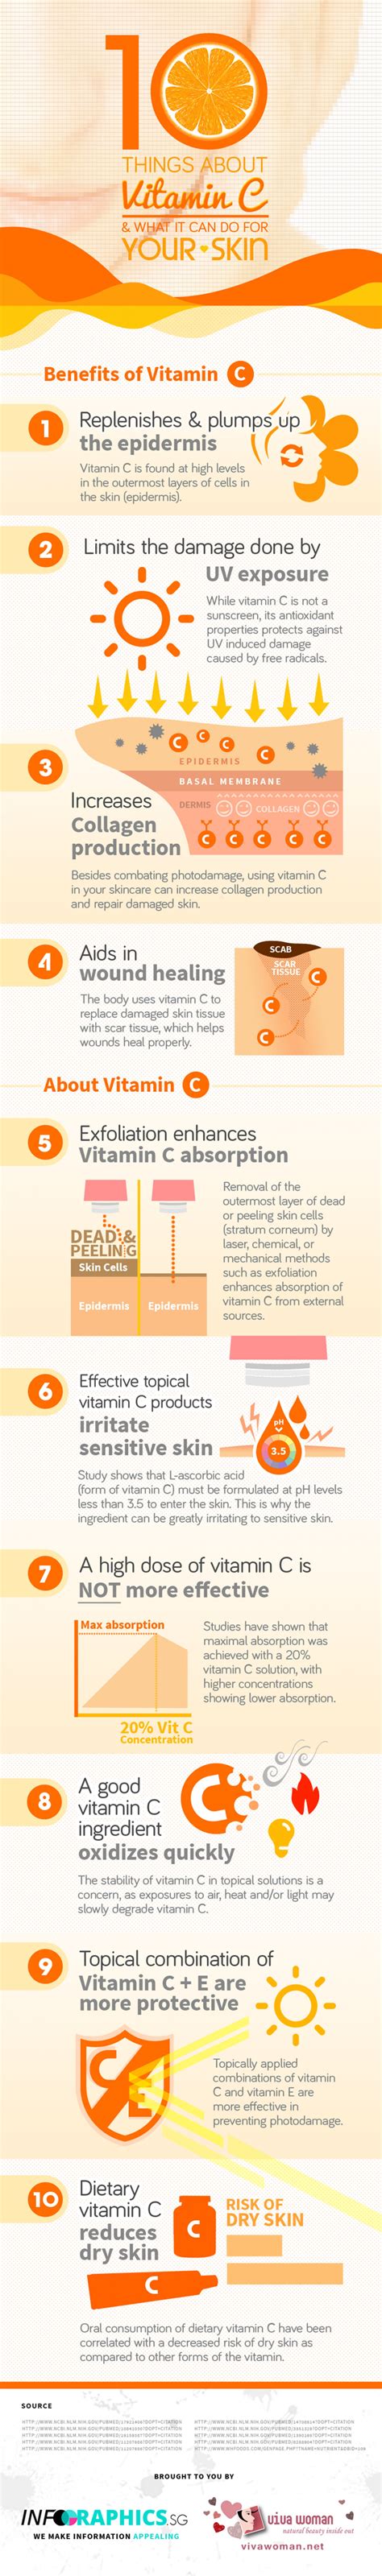 For people who are vitamin c deficient, taking 1000 milligrams of vitamin c supplements a day has been shown to drastically improve the healing of wounds. 10 things about Vitamin C & what it can do for your skin ...